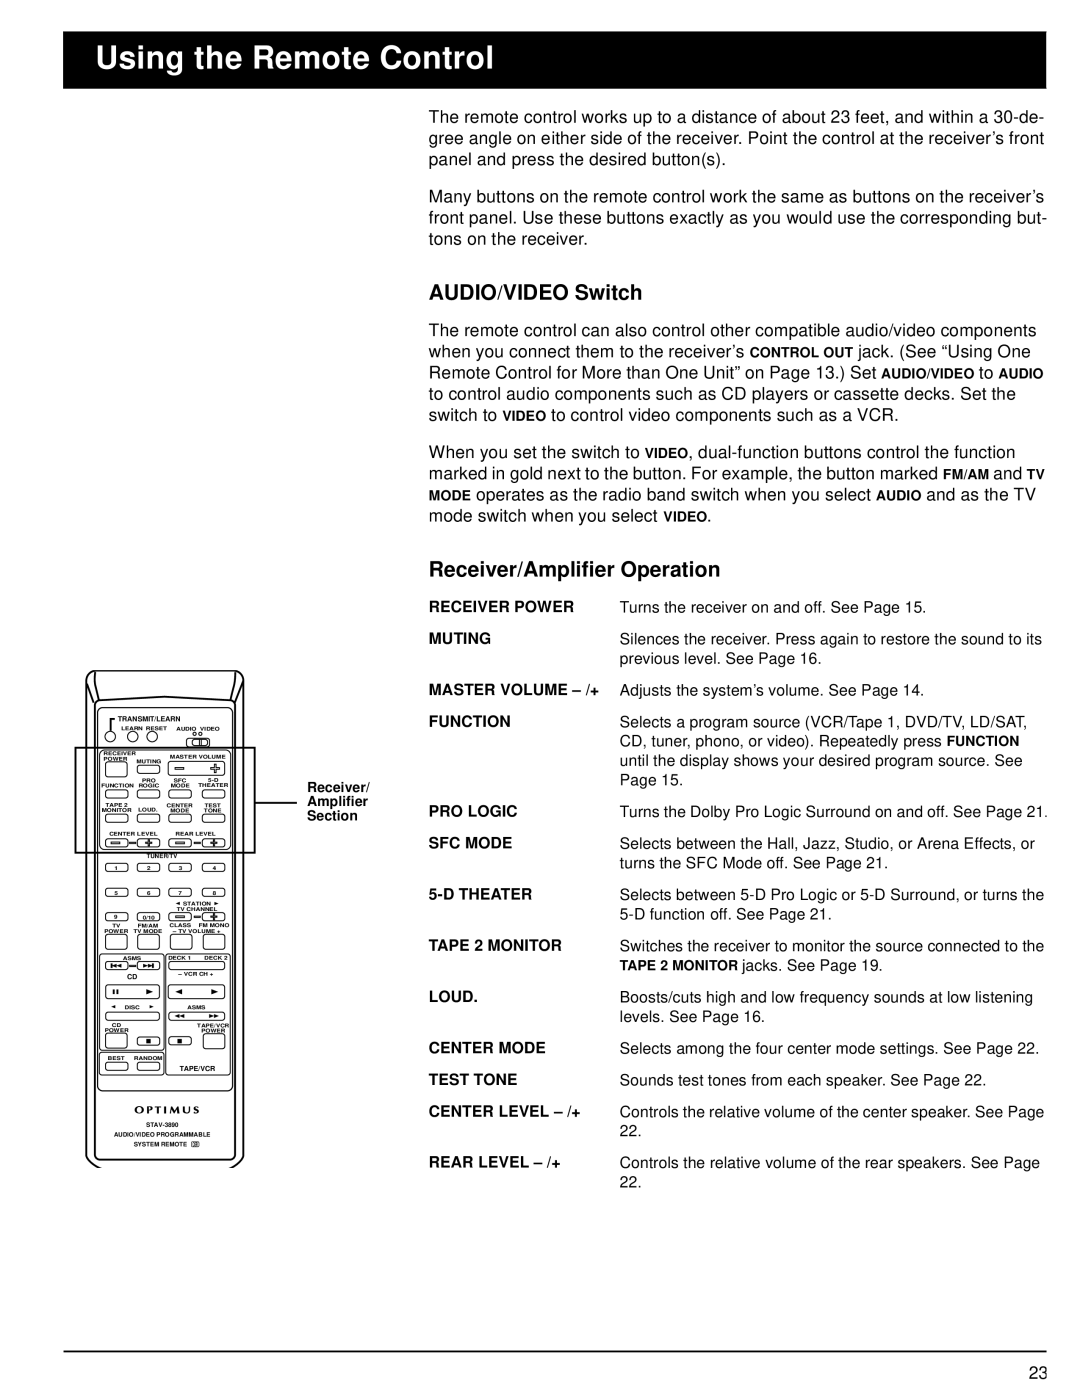 Optimus 31-3040, STAV-3690 owner manual Using the Remote Control, AUDIO/VIDEO Switch, Receiver/Amplifier Operation 